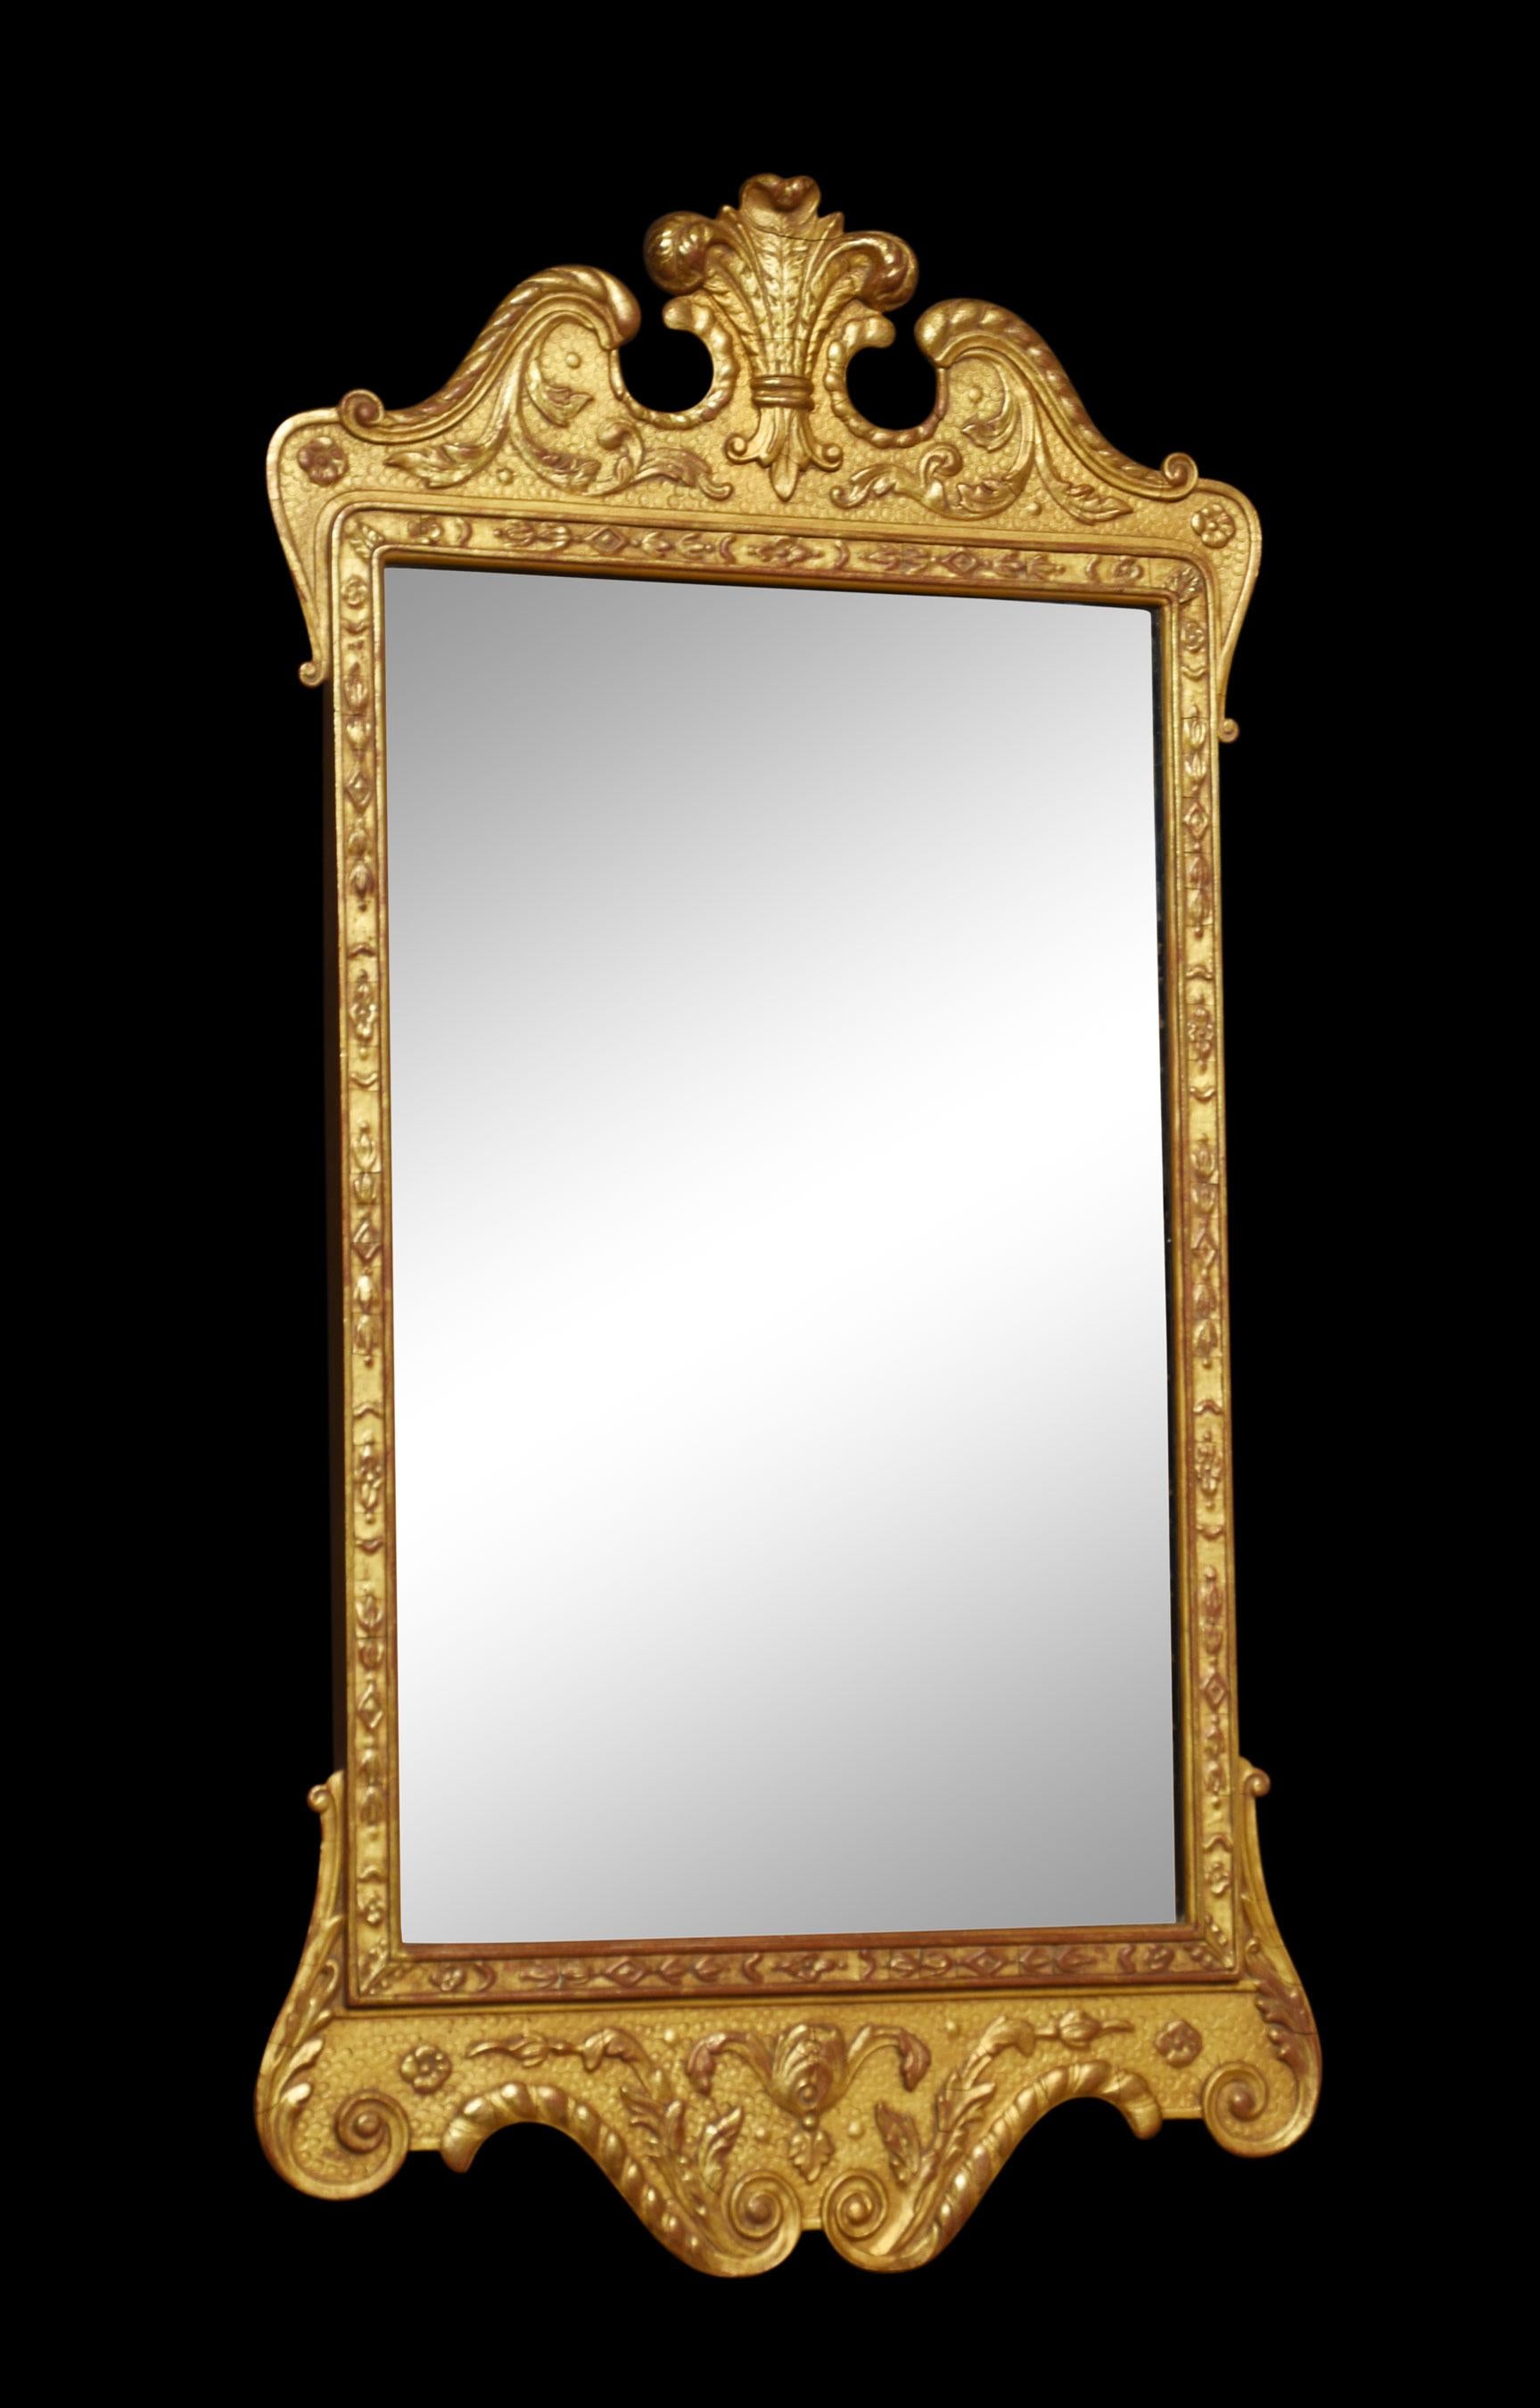 Carved Giltwood Wall Mirror In Good Condition For Sale In Cheshire, GB